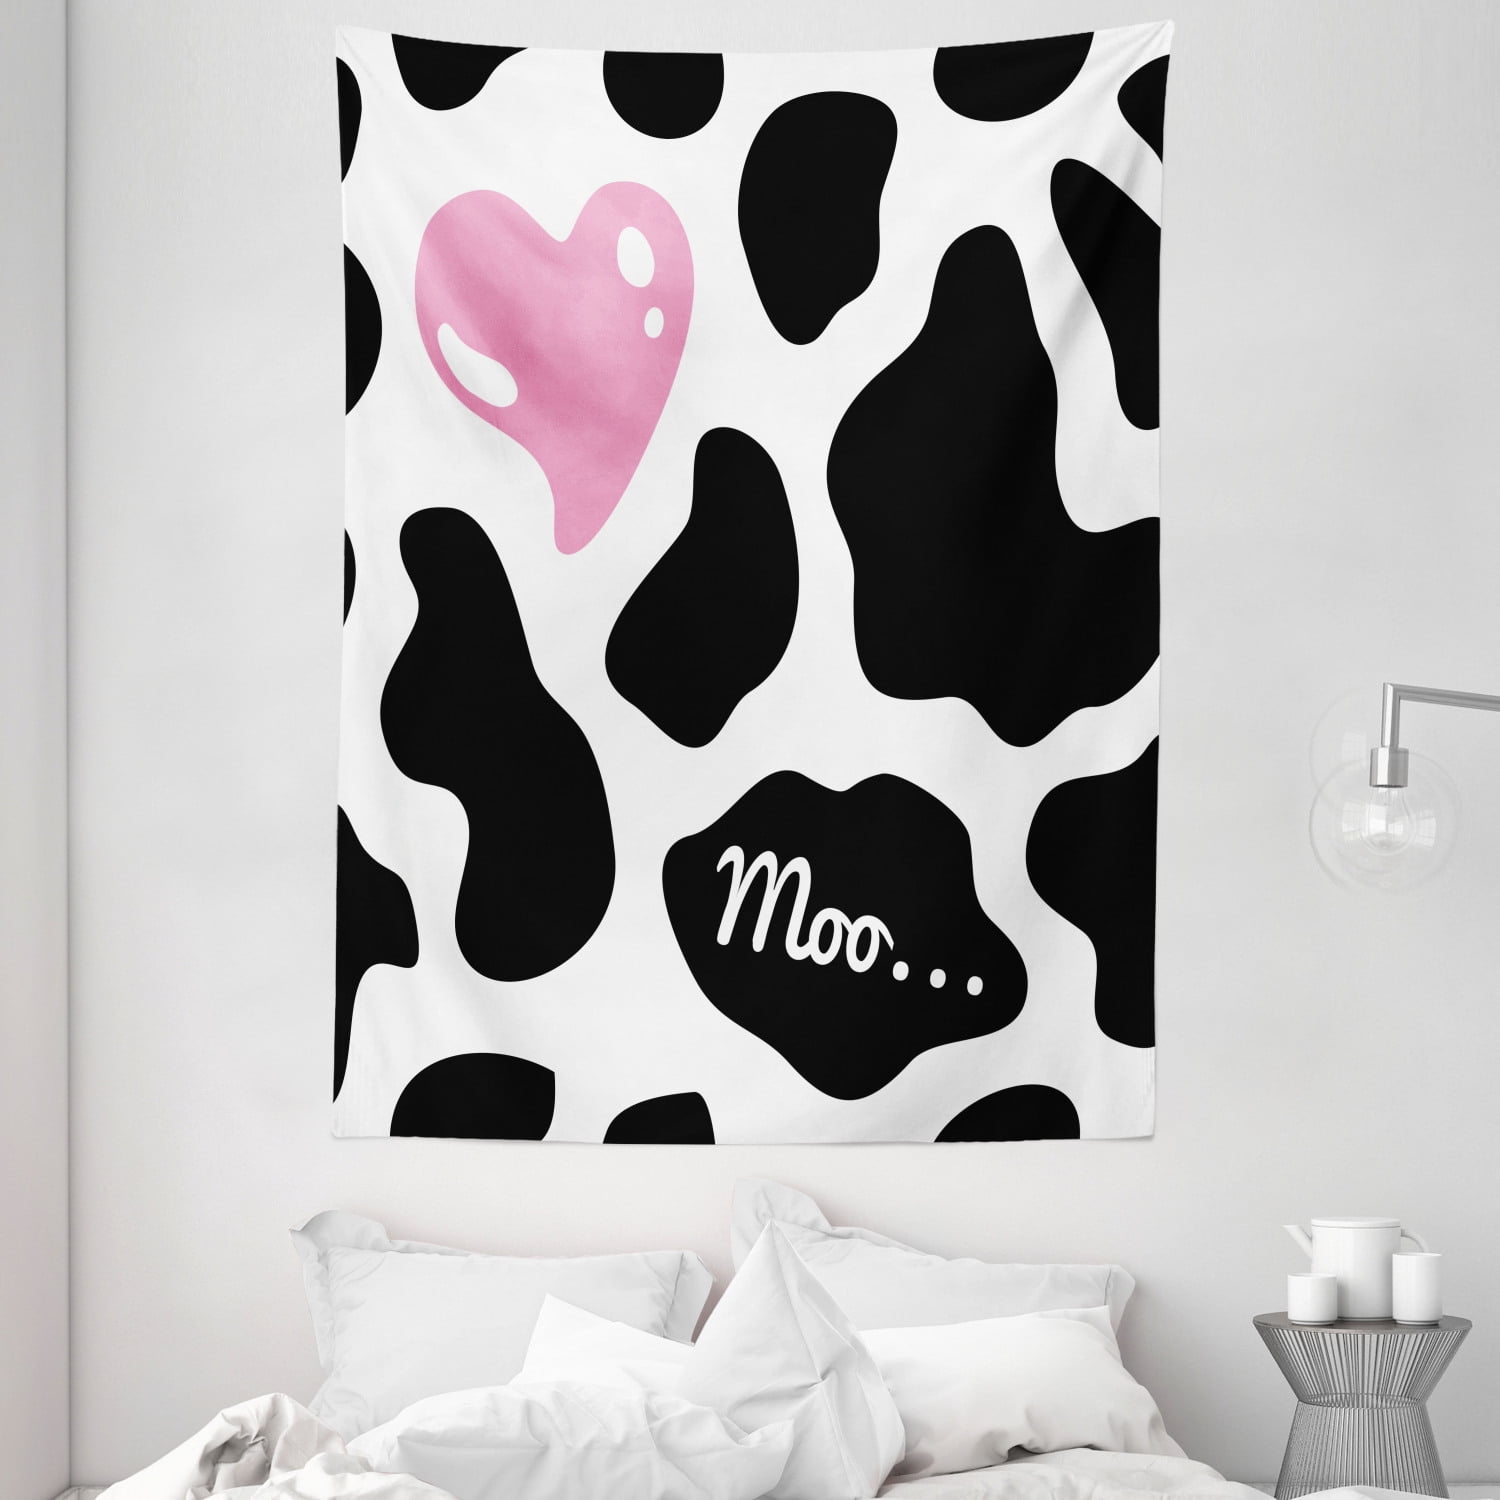 Ekspression snemand Stoop Cow Print Tapestry, Camouflage Hide Pattern in Black and White with Cute  Pink Heart Shape Moo, Wall Hanging for Bedroom Living Room Dorm Decor, 40W  X 60L Inches, Pink Black White, by